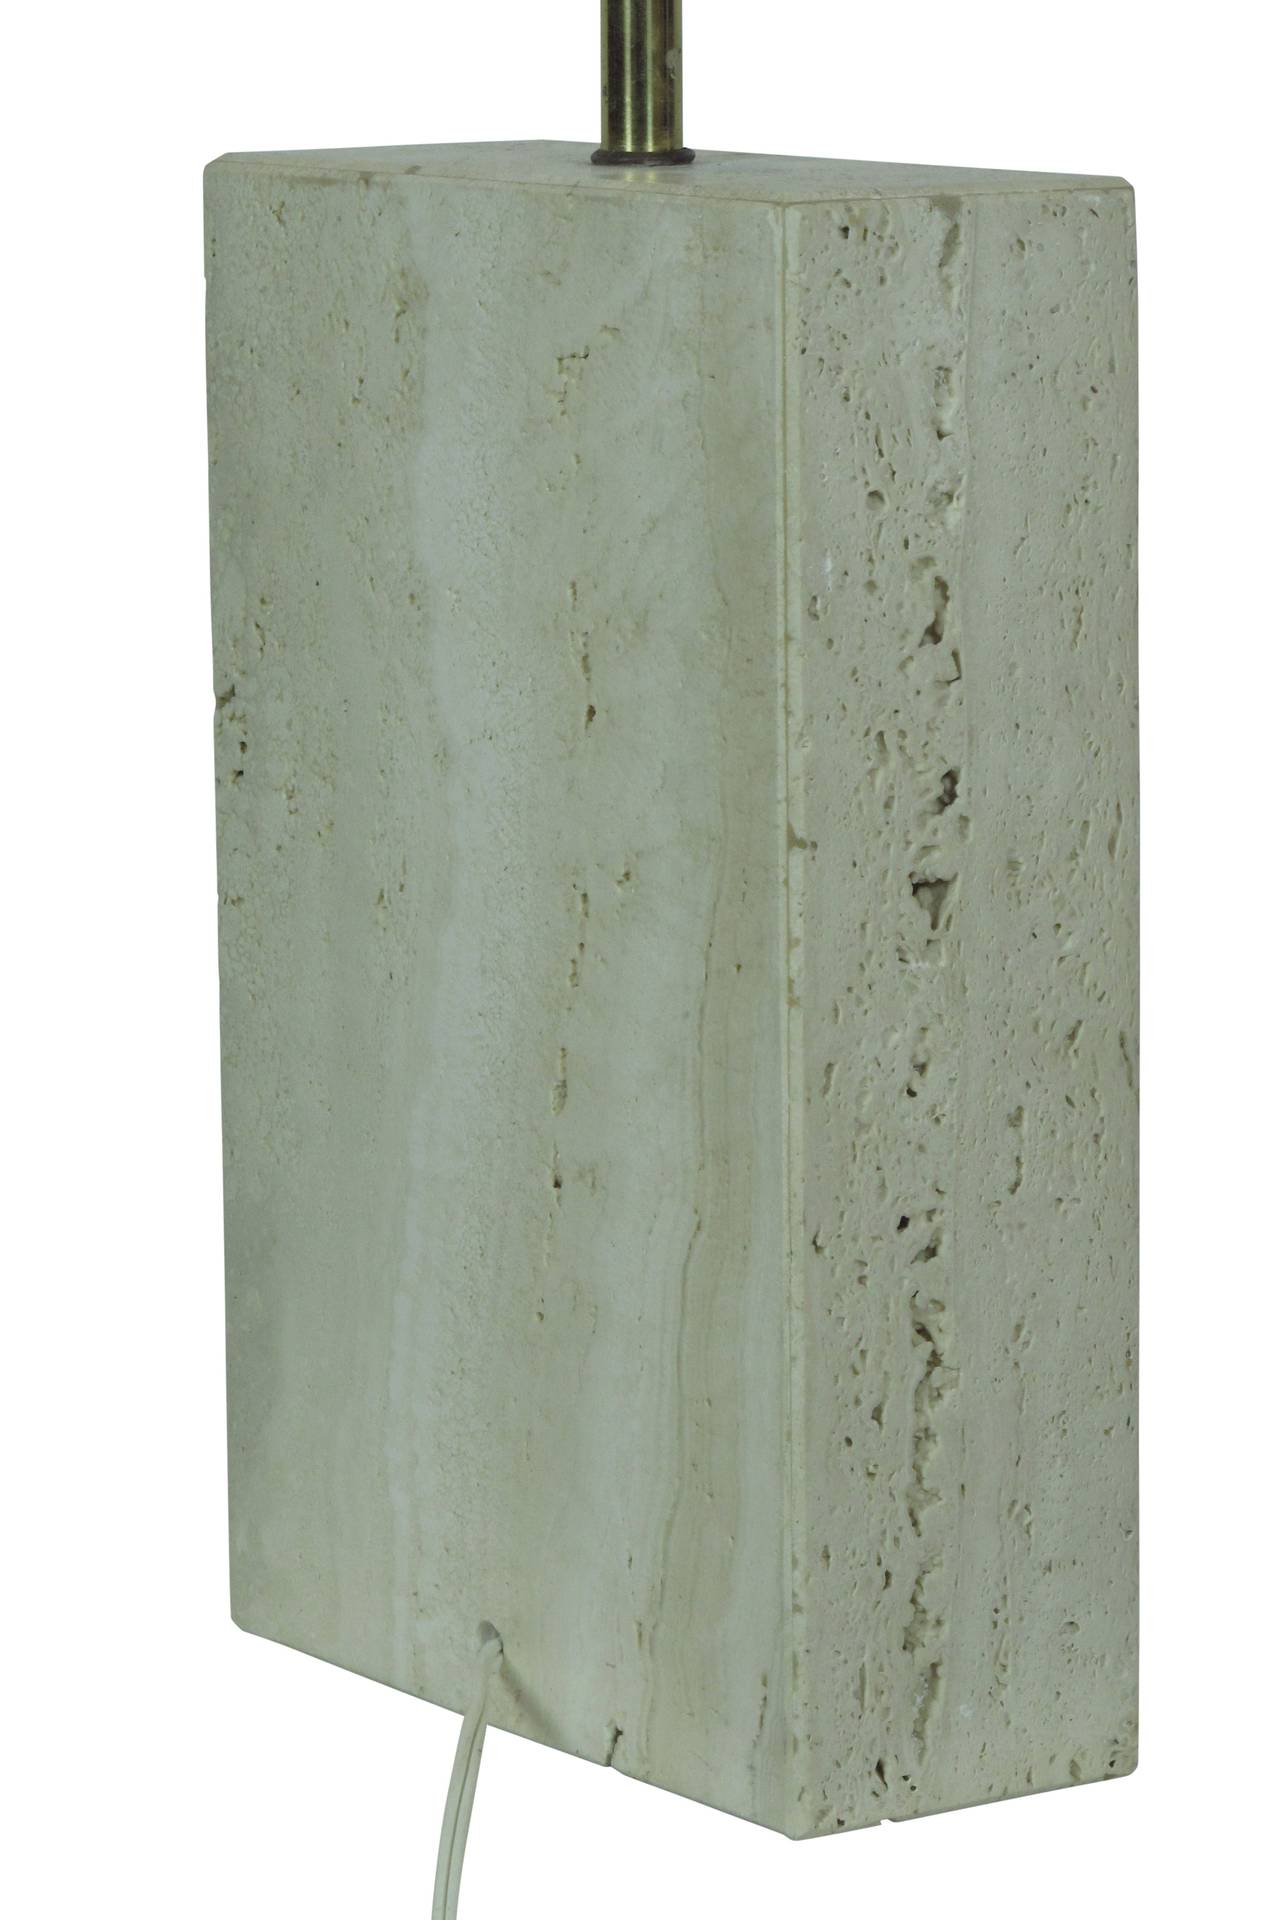 Travertine table lamp with impressed disc design. Made in Italy in the 50's and imported to United States by Raymor. Retains original socket and wiring. Will update socket and wiring to customer's specifications upon request.